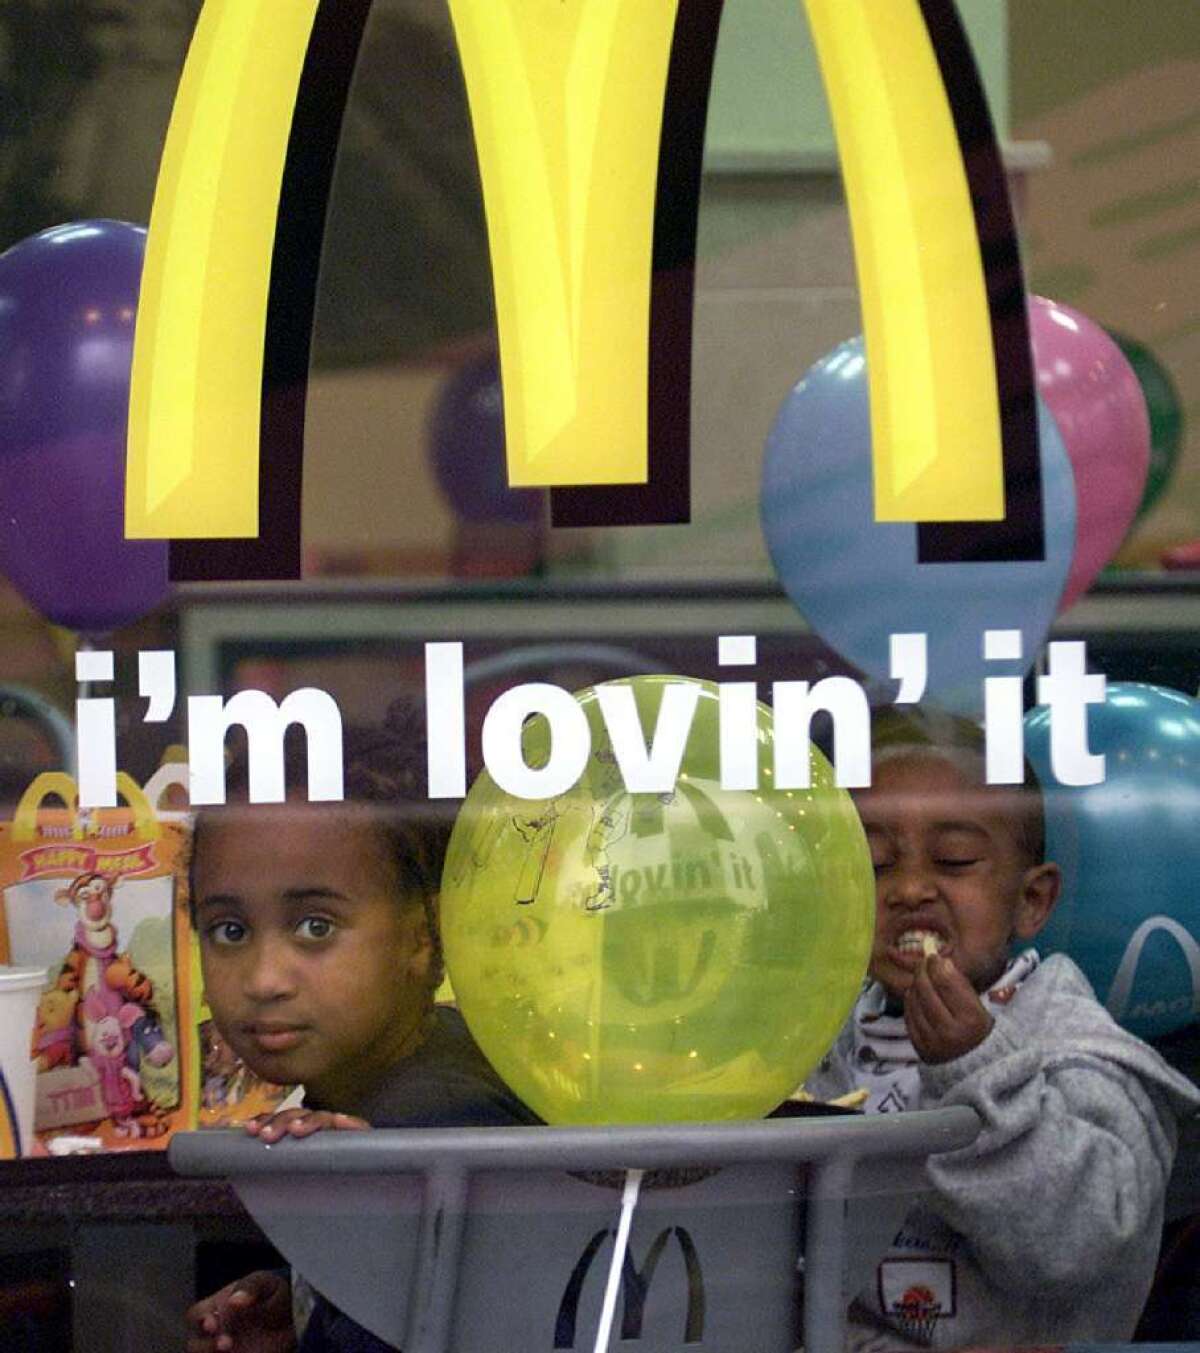 If you closed all the fast-food restaurants, would fewer U.S. kids be fat? A new study says no.